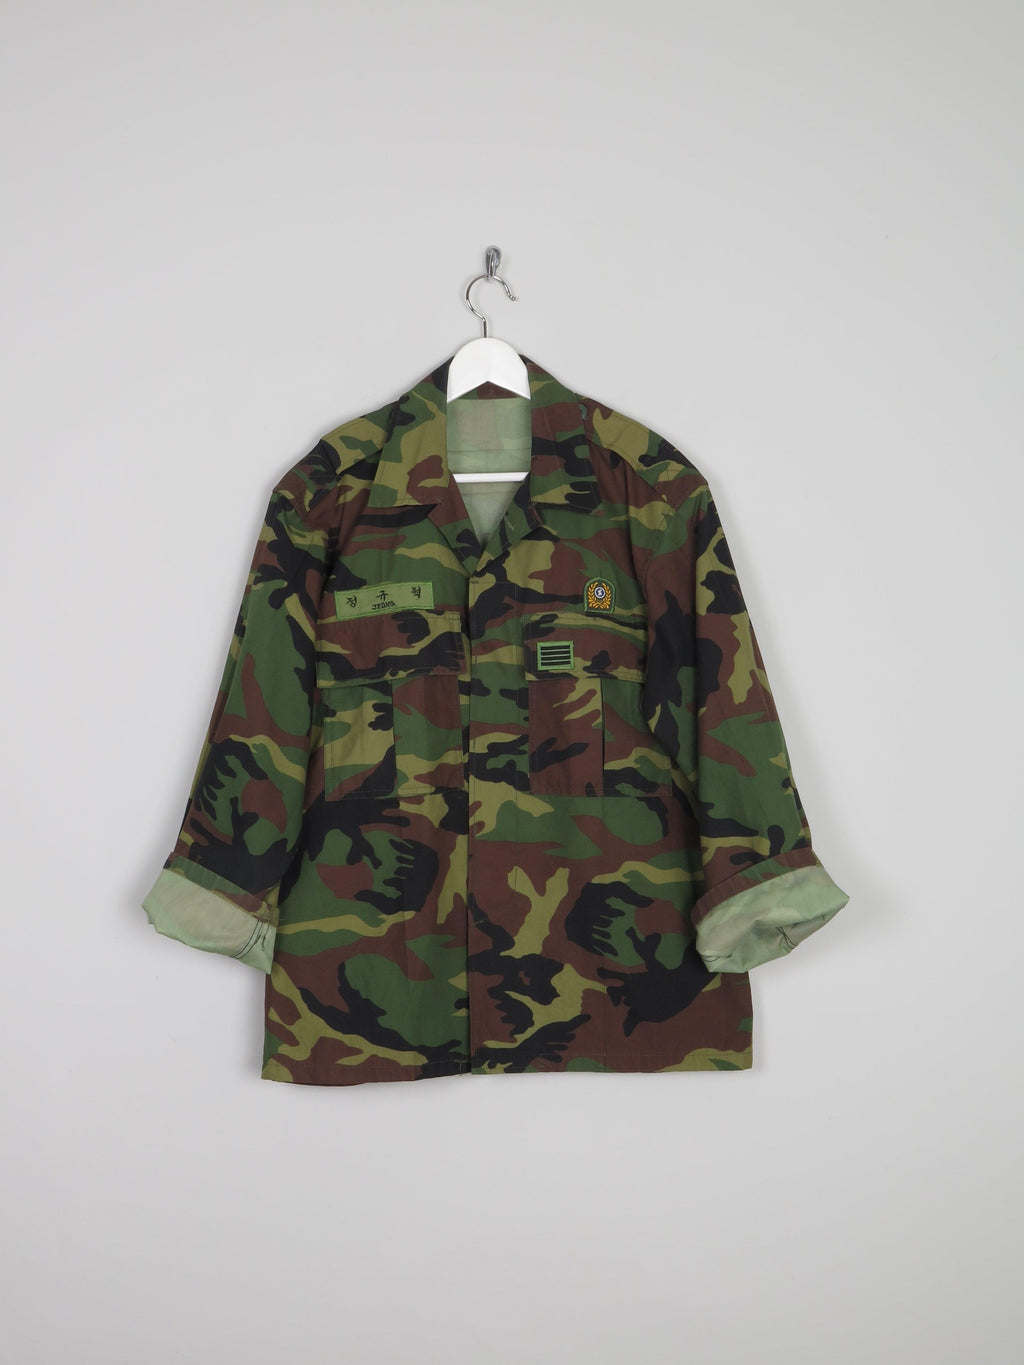 Men's Green Camouflage Army Shirt M - The Harlequin